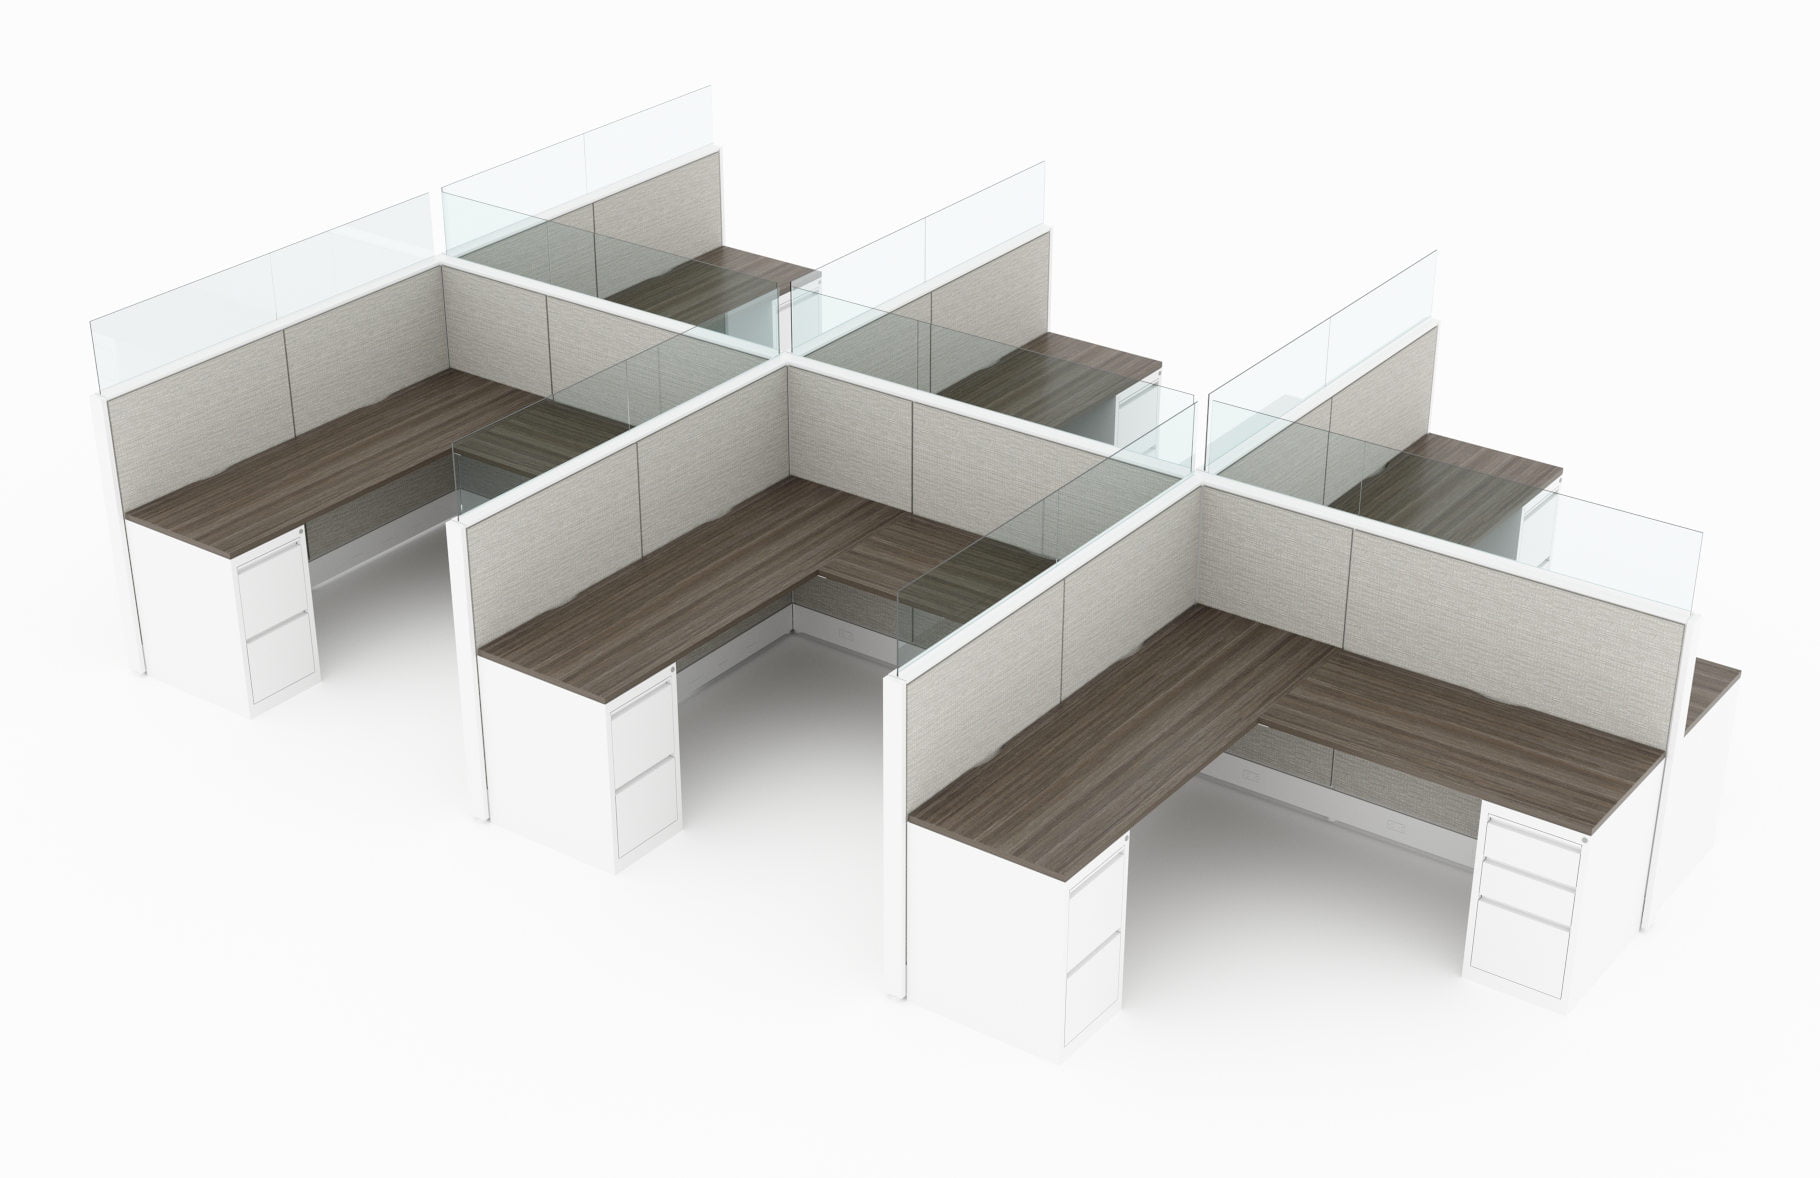 6-Person set of L-shaped workstations. Frameless glass pieces are featured on the top and side partitions. Two sets of supply drawers are placed at each end of each work station. of the partition. This is rendered on a white background. Model is EV510.